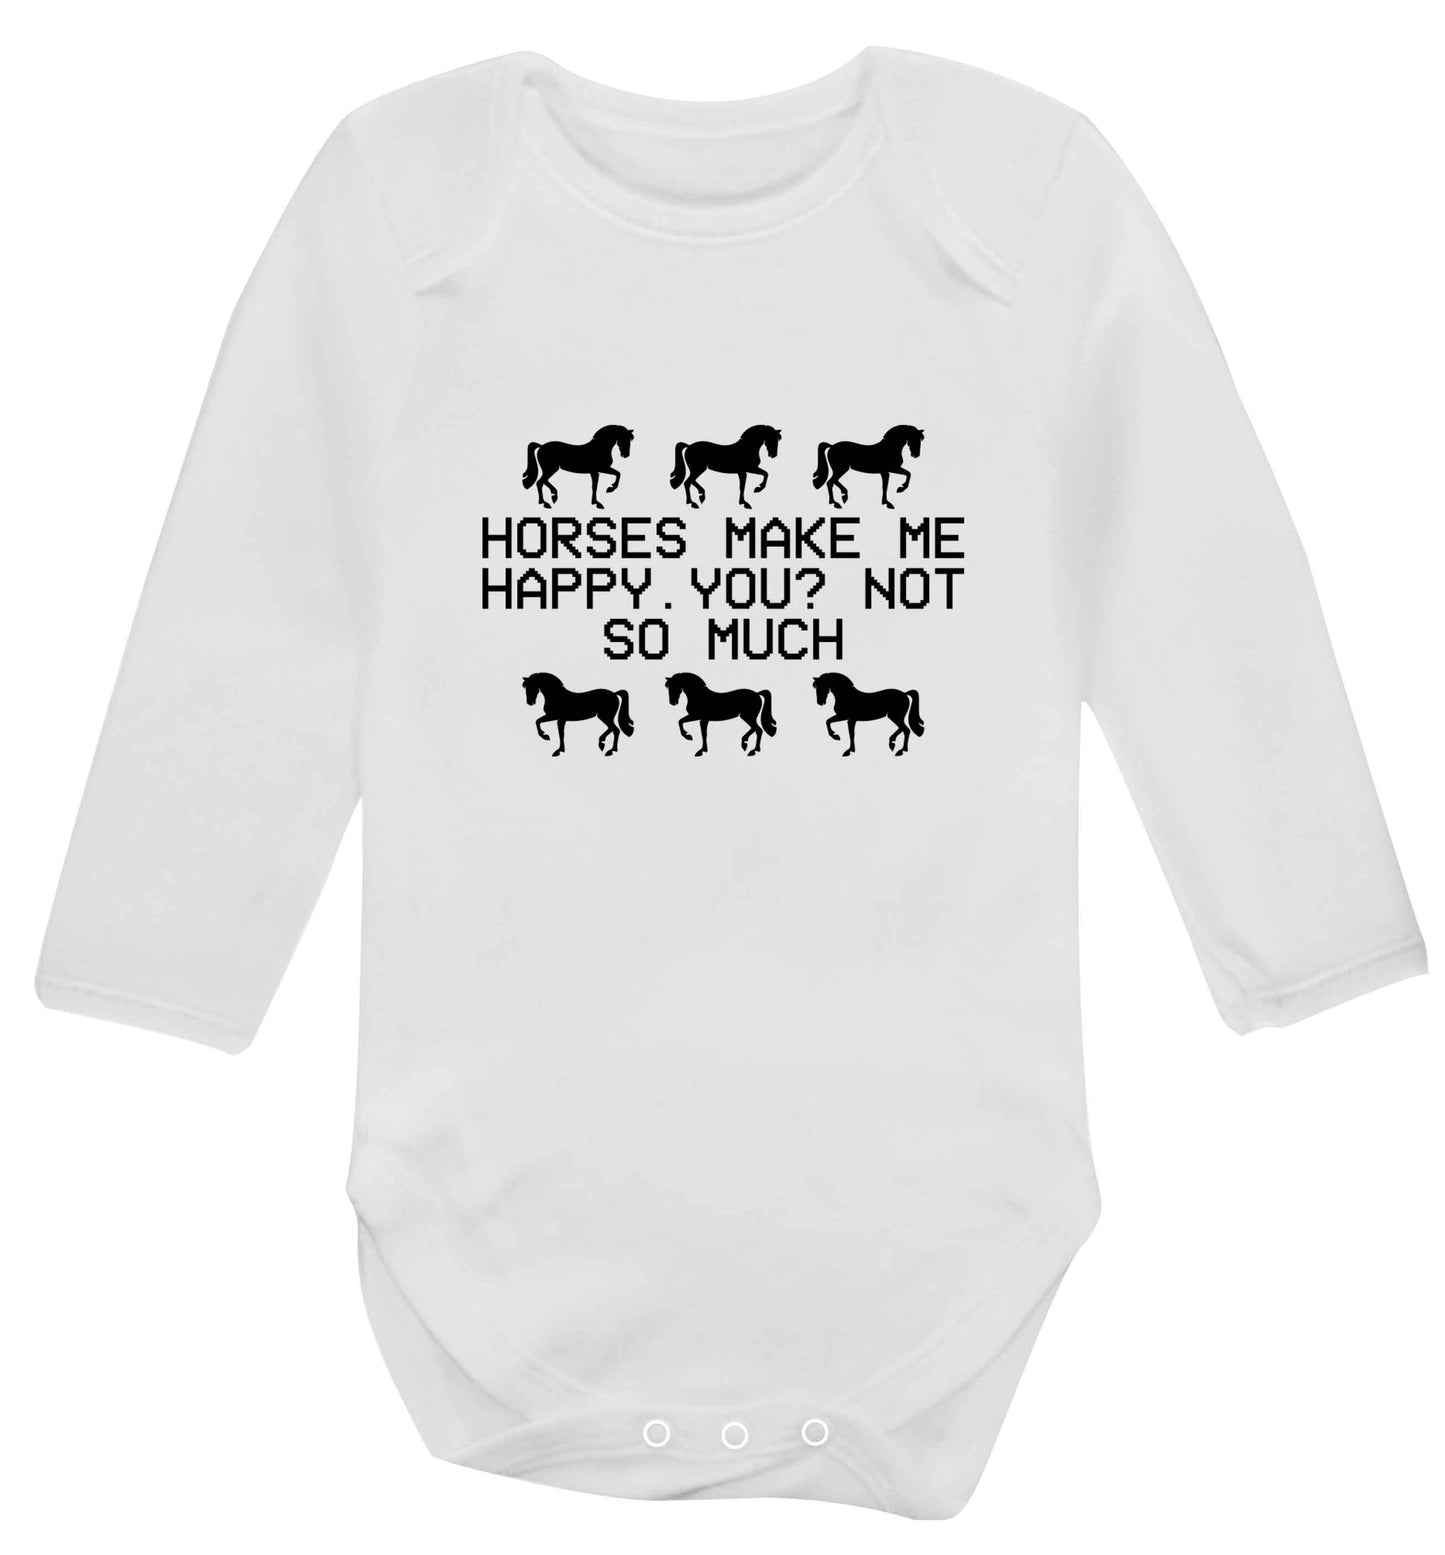 Horses make me happy, you not so much baby vest long sleeved white 6-12 months